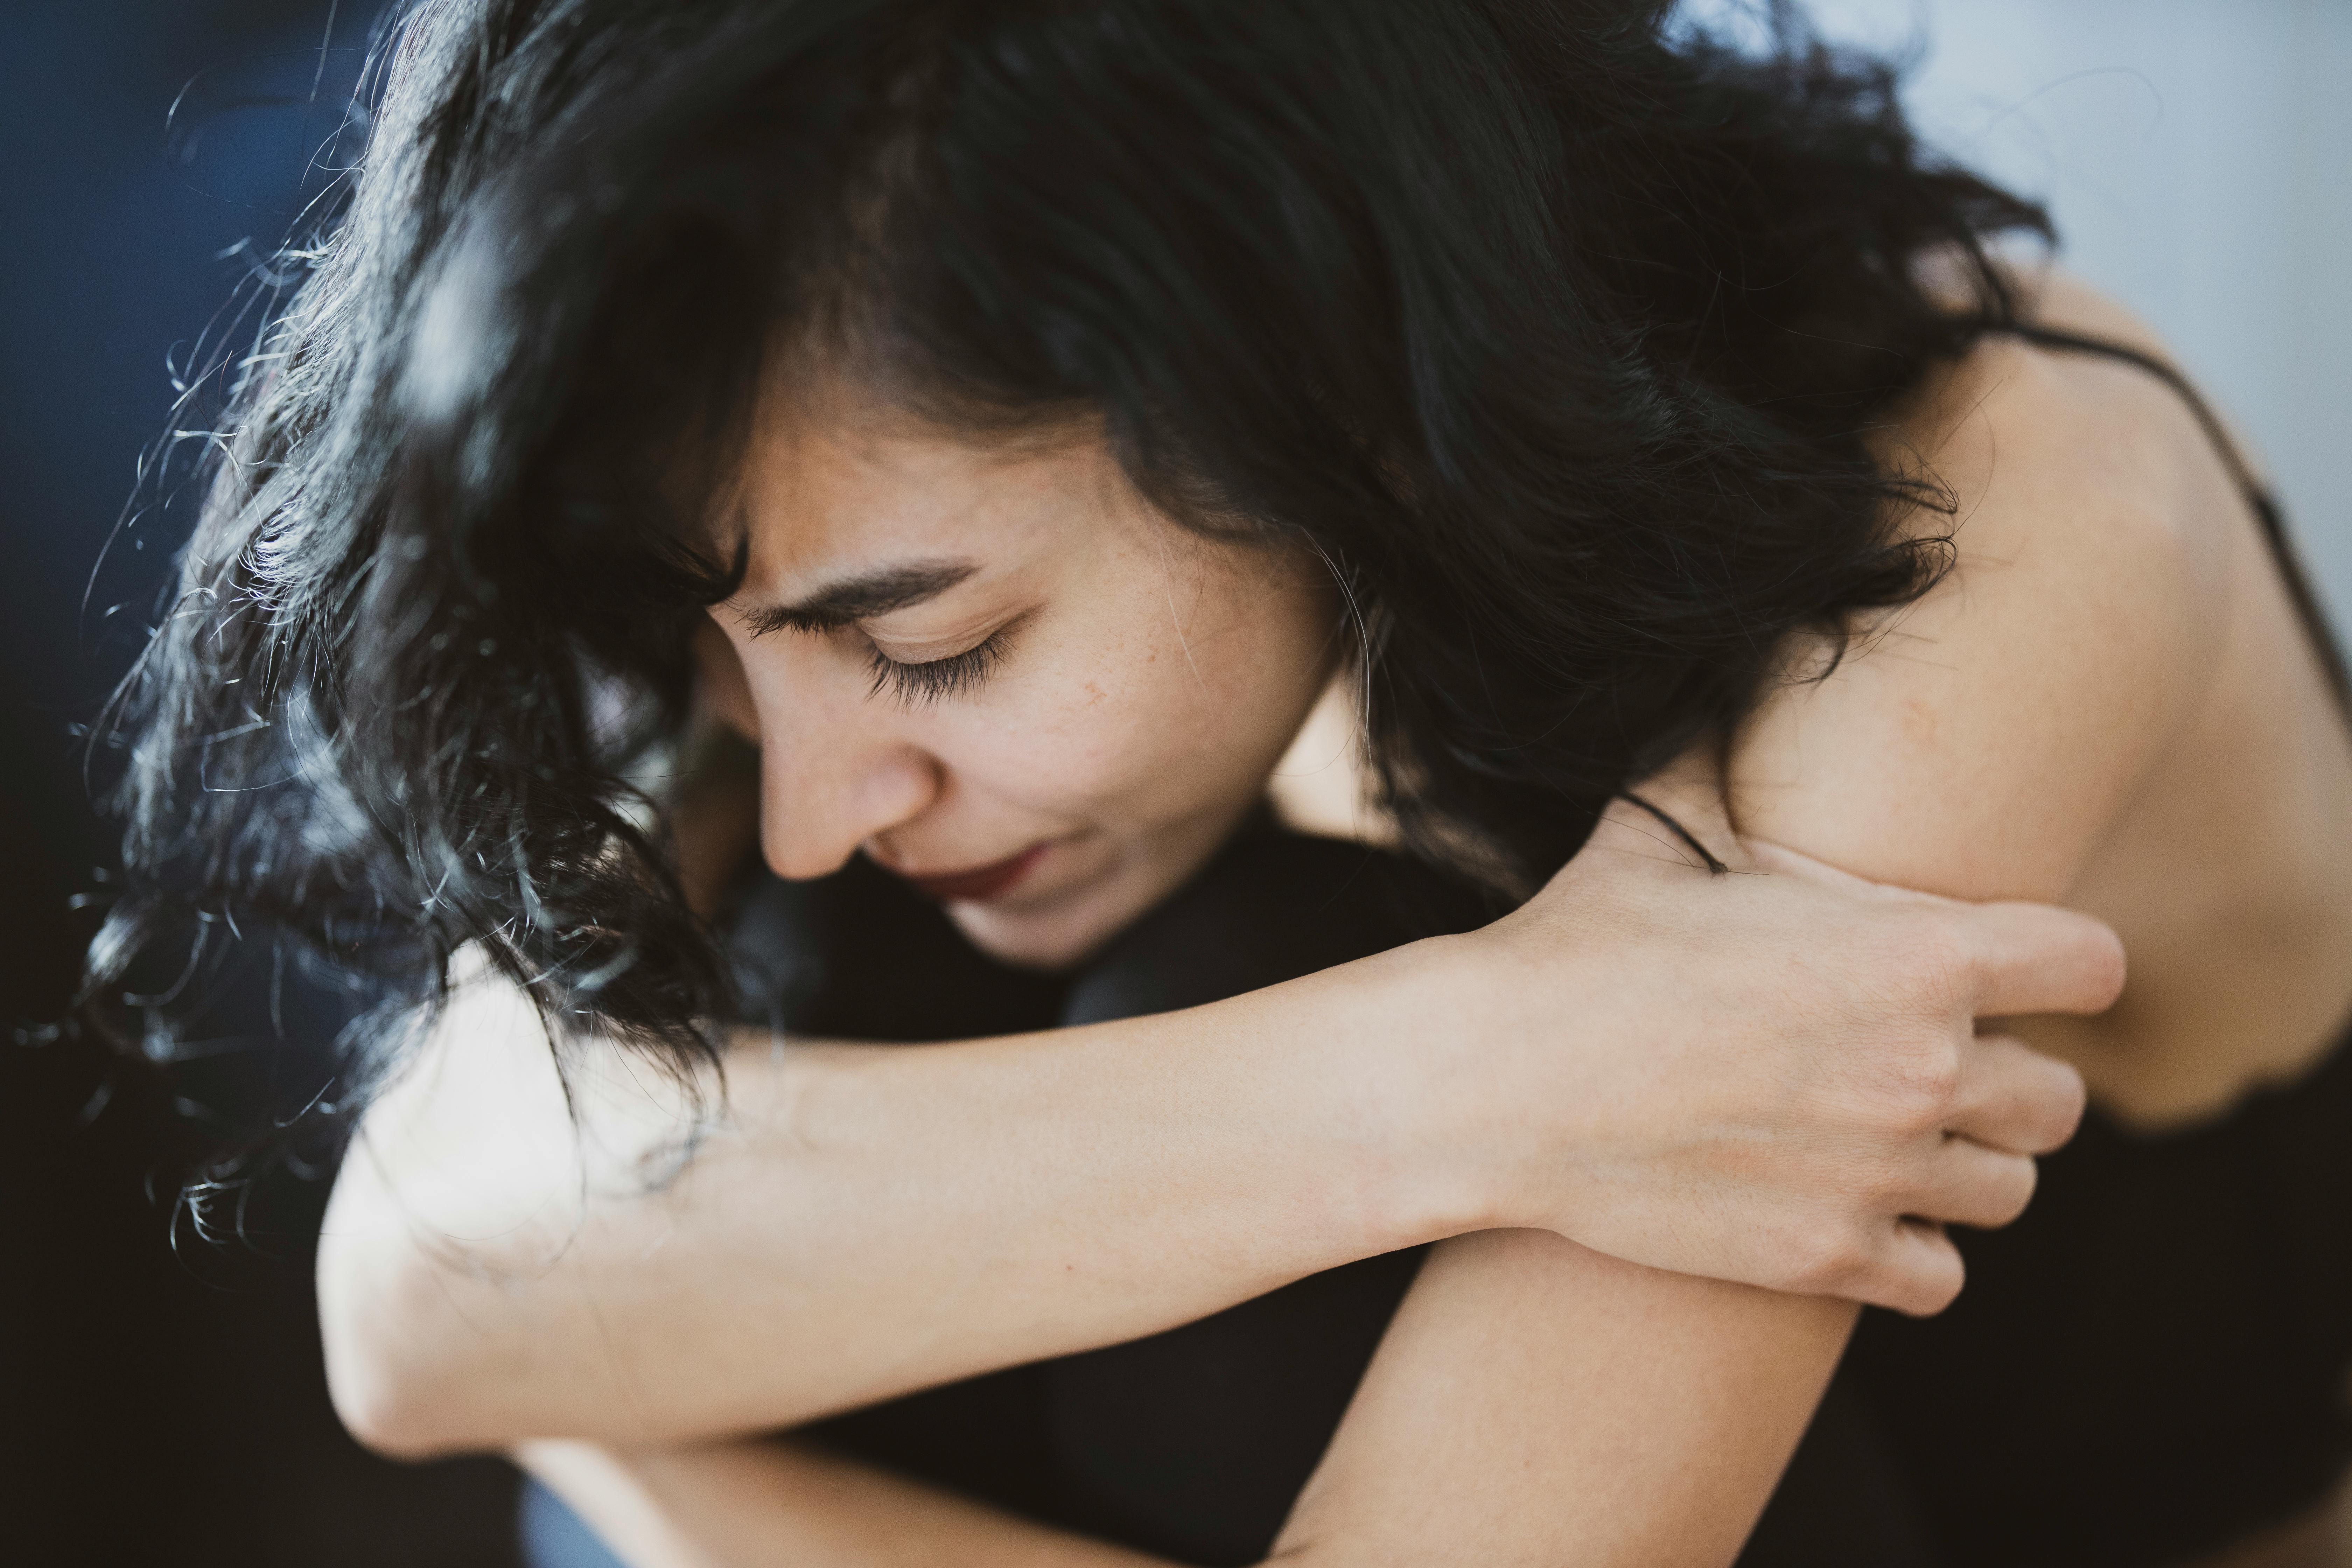 Woman holds back tears | Source: Pexels